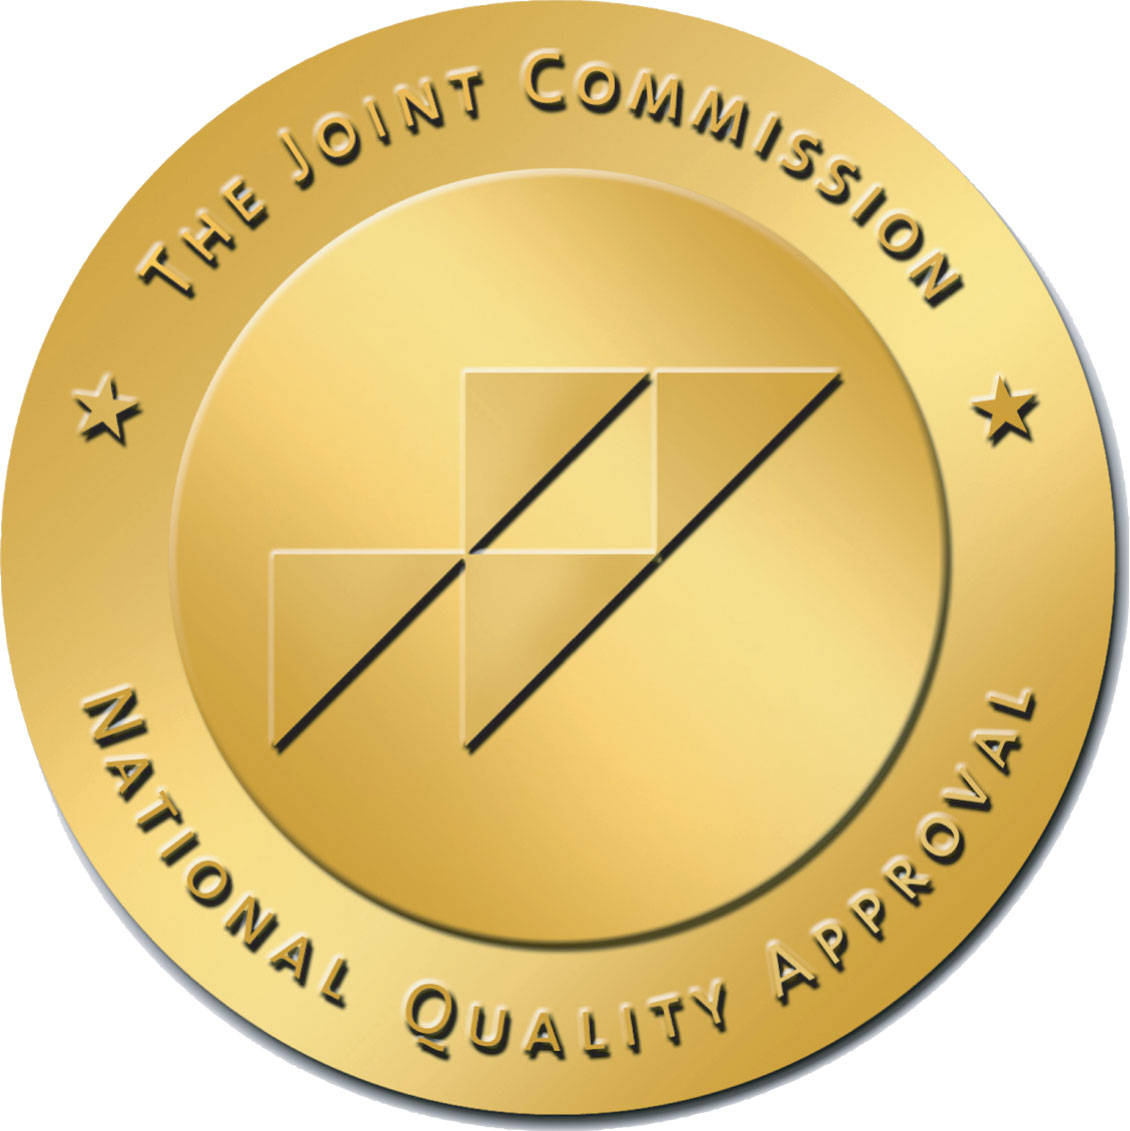 The Joint Commission National Quality Approval gold seal graphic